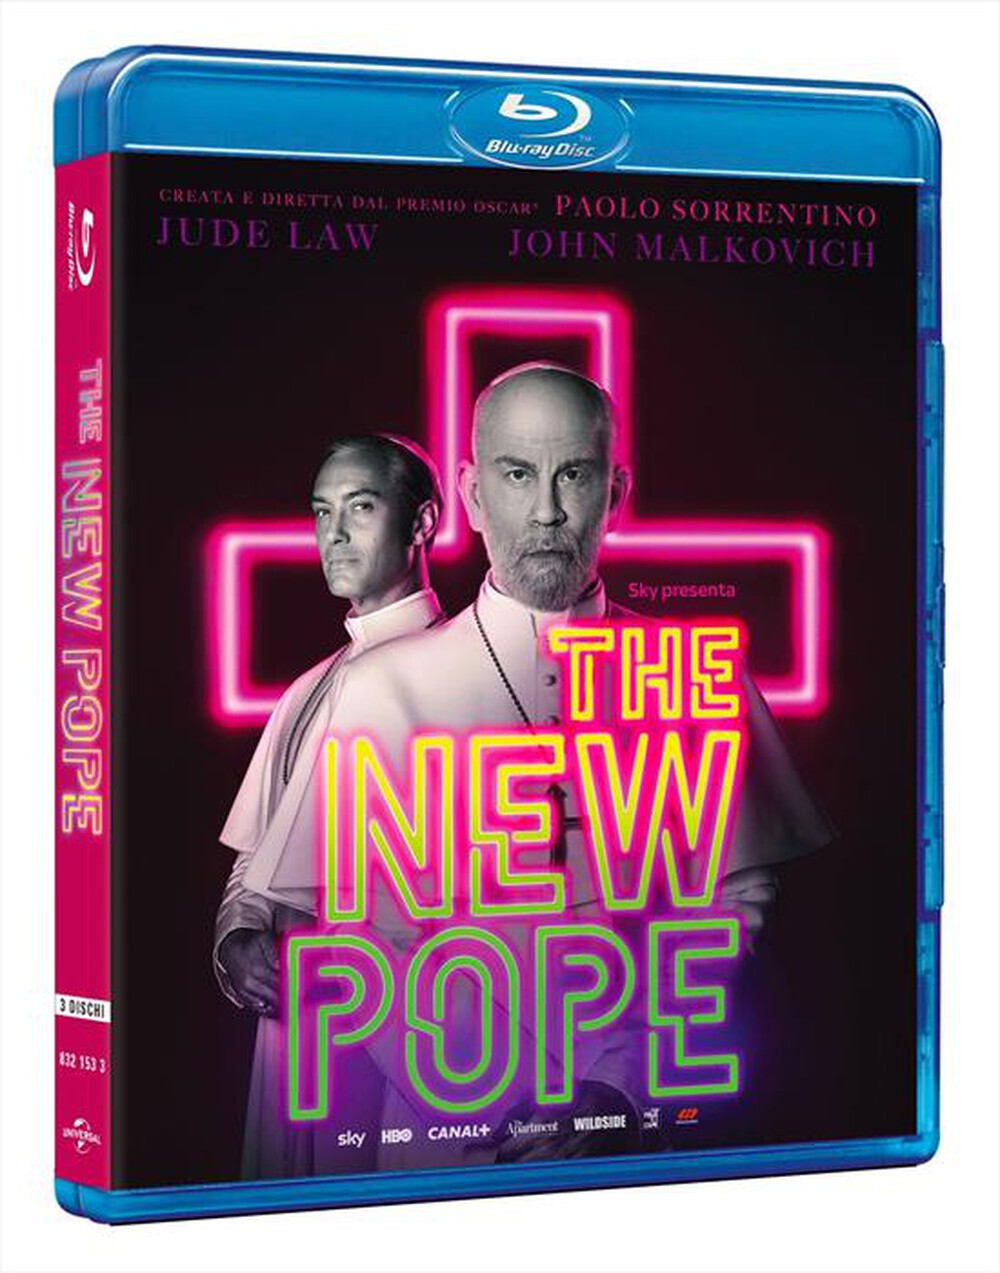 "WARNER HOME VIDEO - New Pope (The) (3 Blu-Ray)"